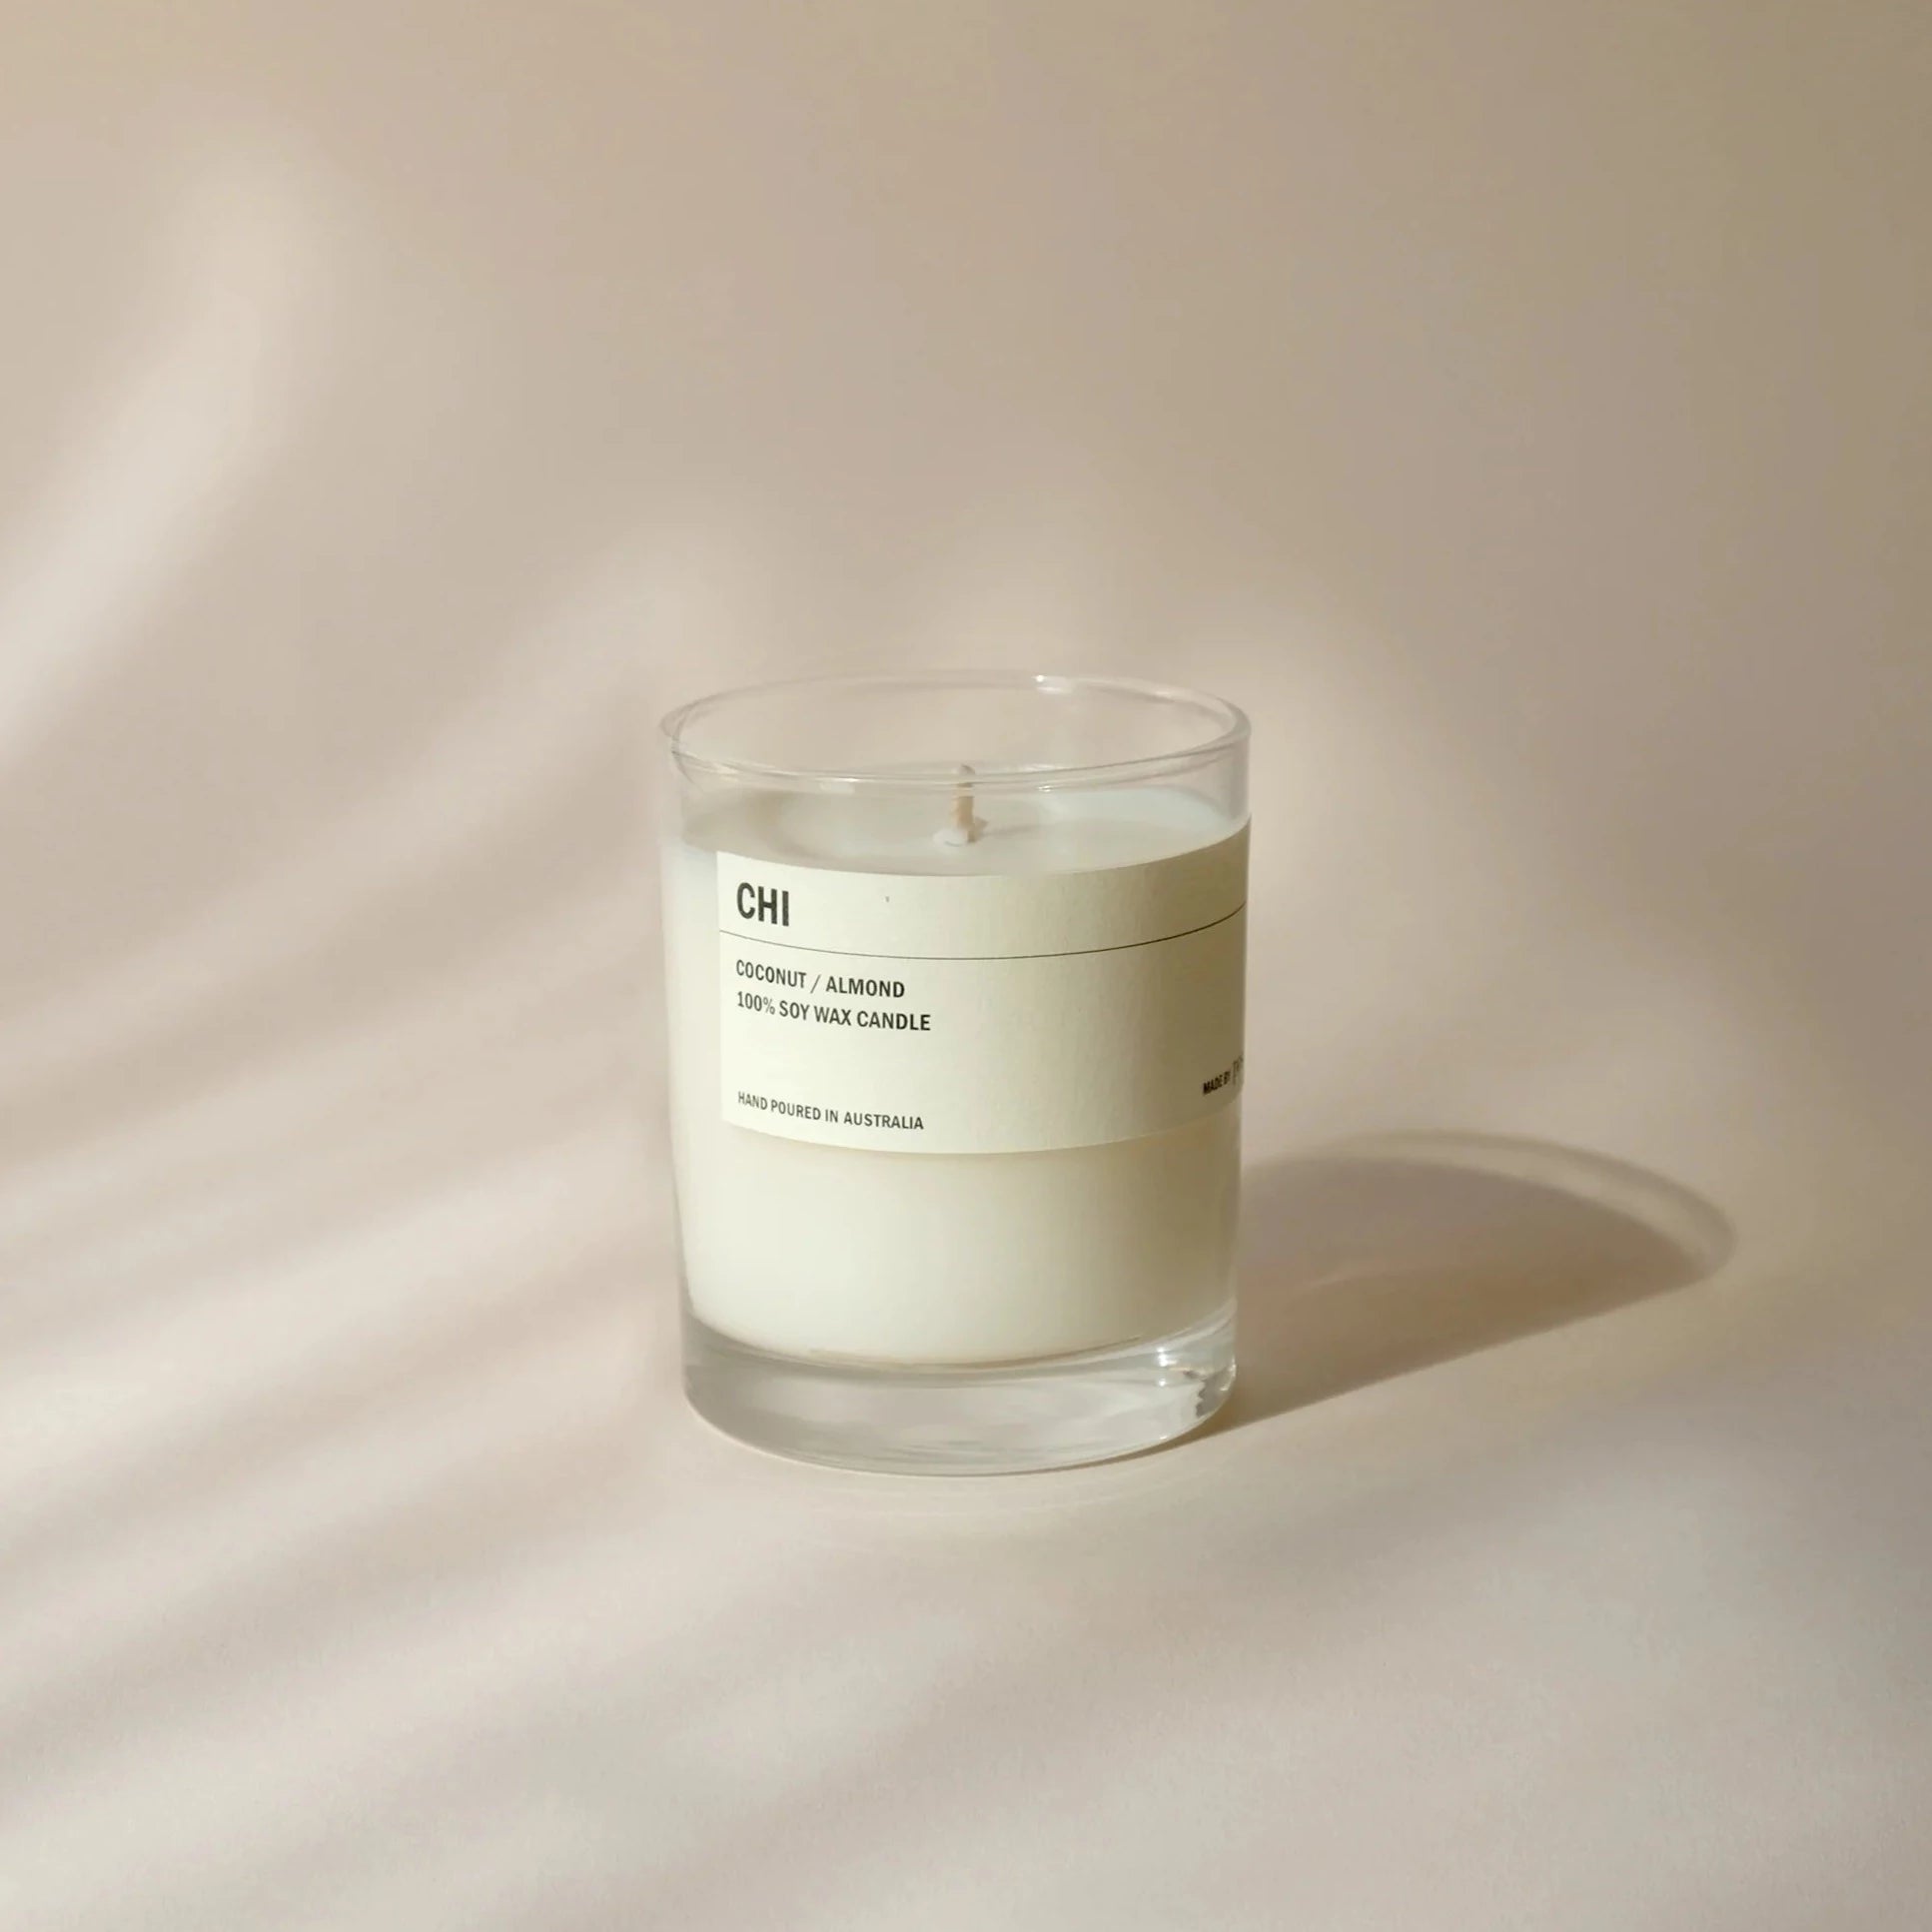 Coconut Almond Soy Wax Candle by Posie